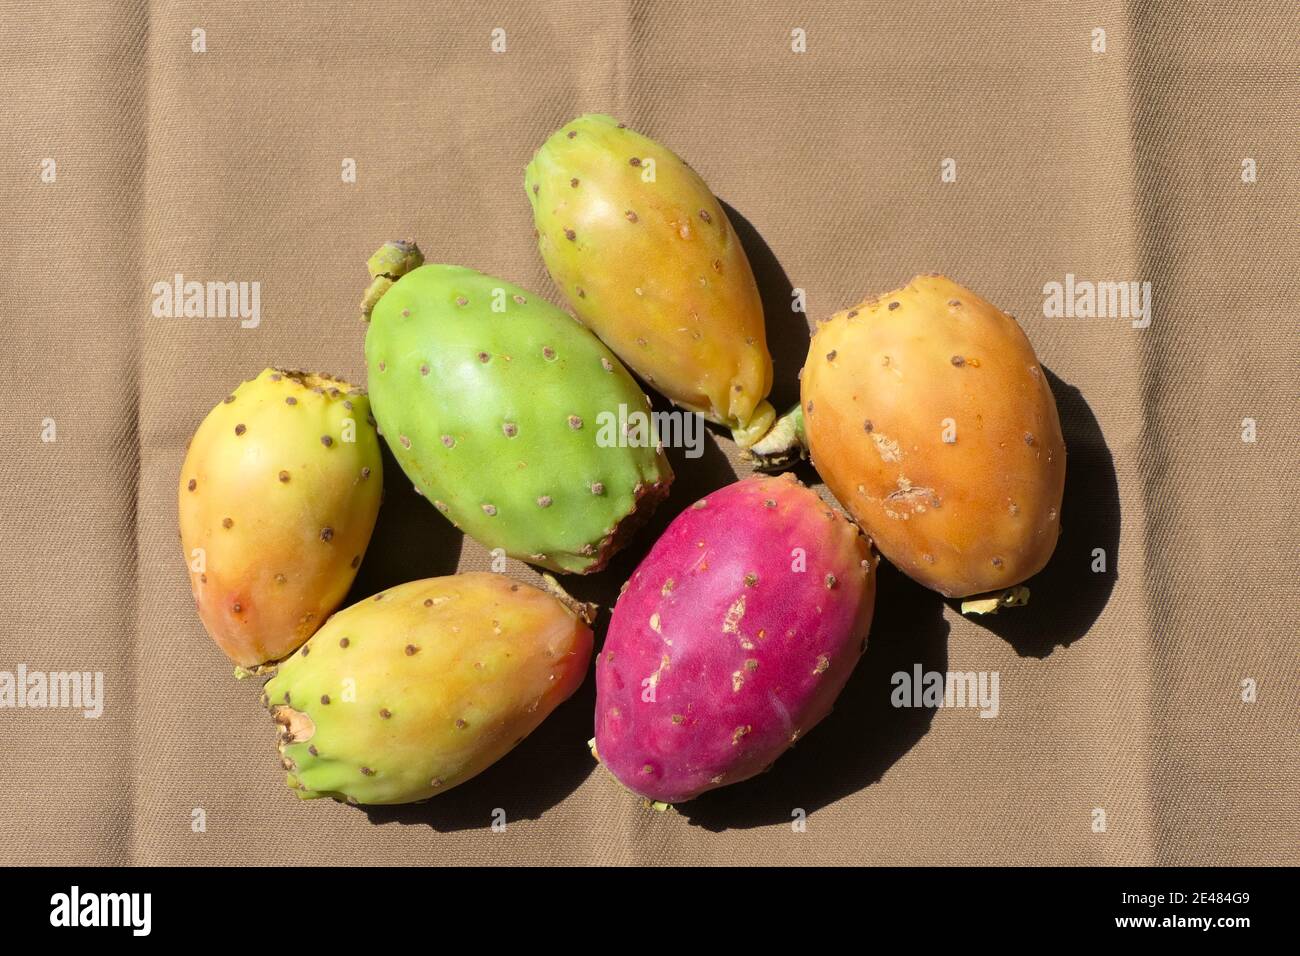 Juicy and colorful prickly pear fruits with small thin spines on the skin Stock Photo